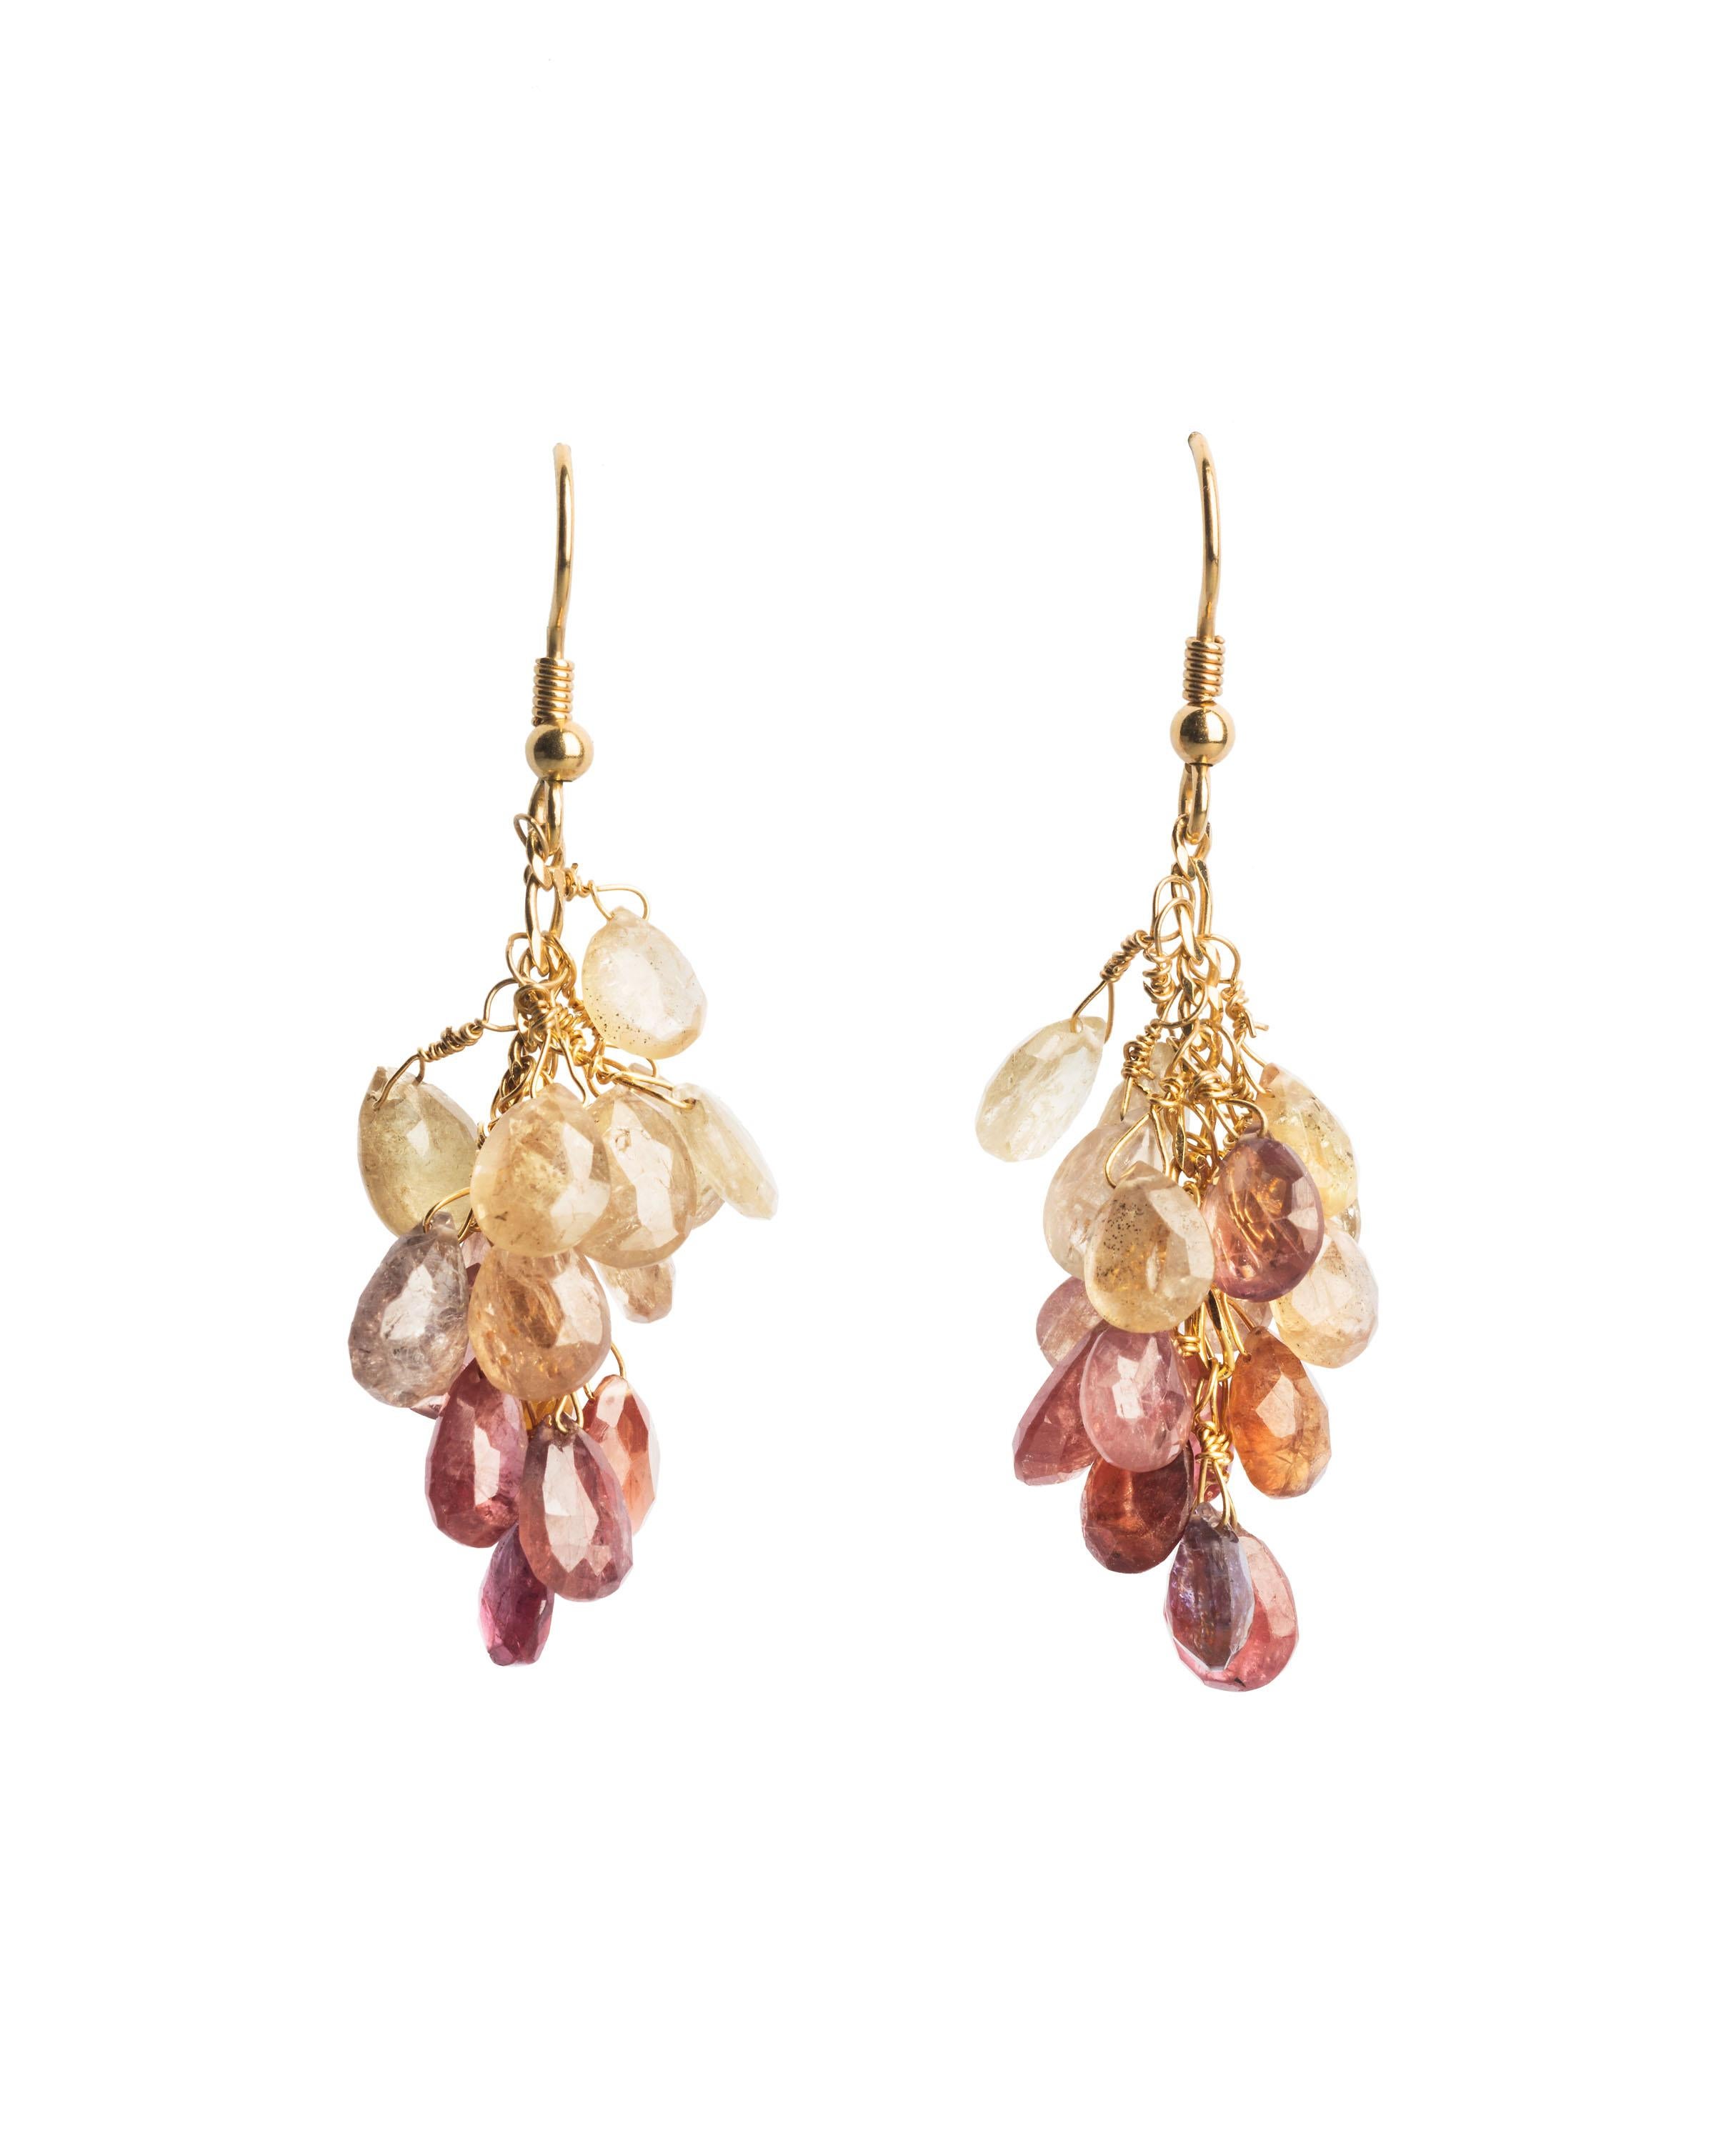 Jane Magon Collections Bohemian Chic Drop Dangles Earrings with cascading Sapphires in shades of Pink and Yellow all wire wrapped in 18kt Yellow Gold. Shepards Hoop for pierced ears. 